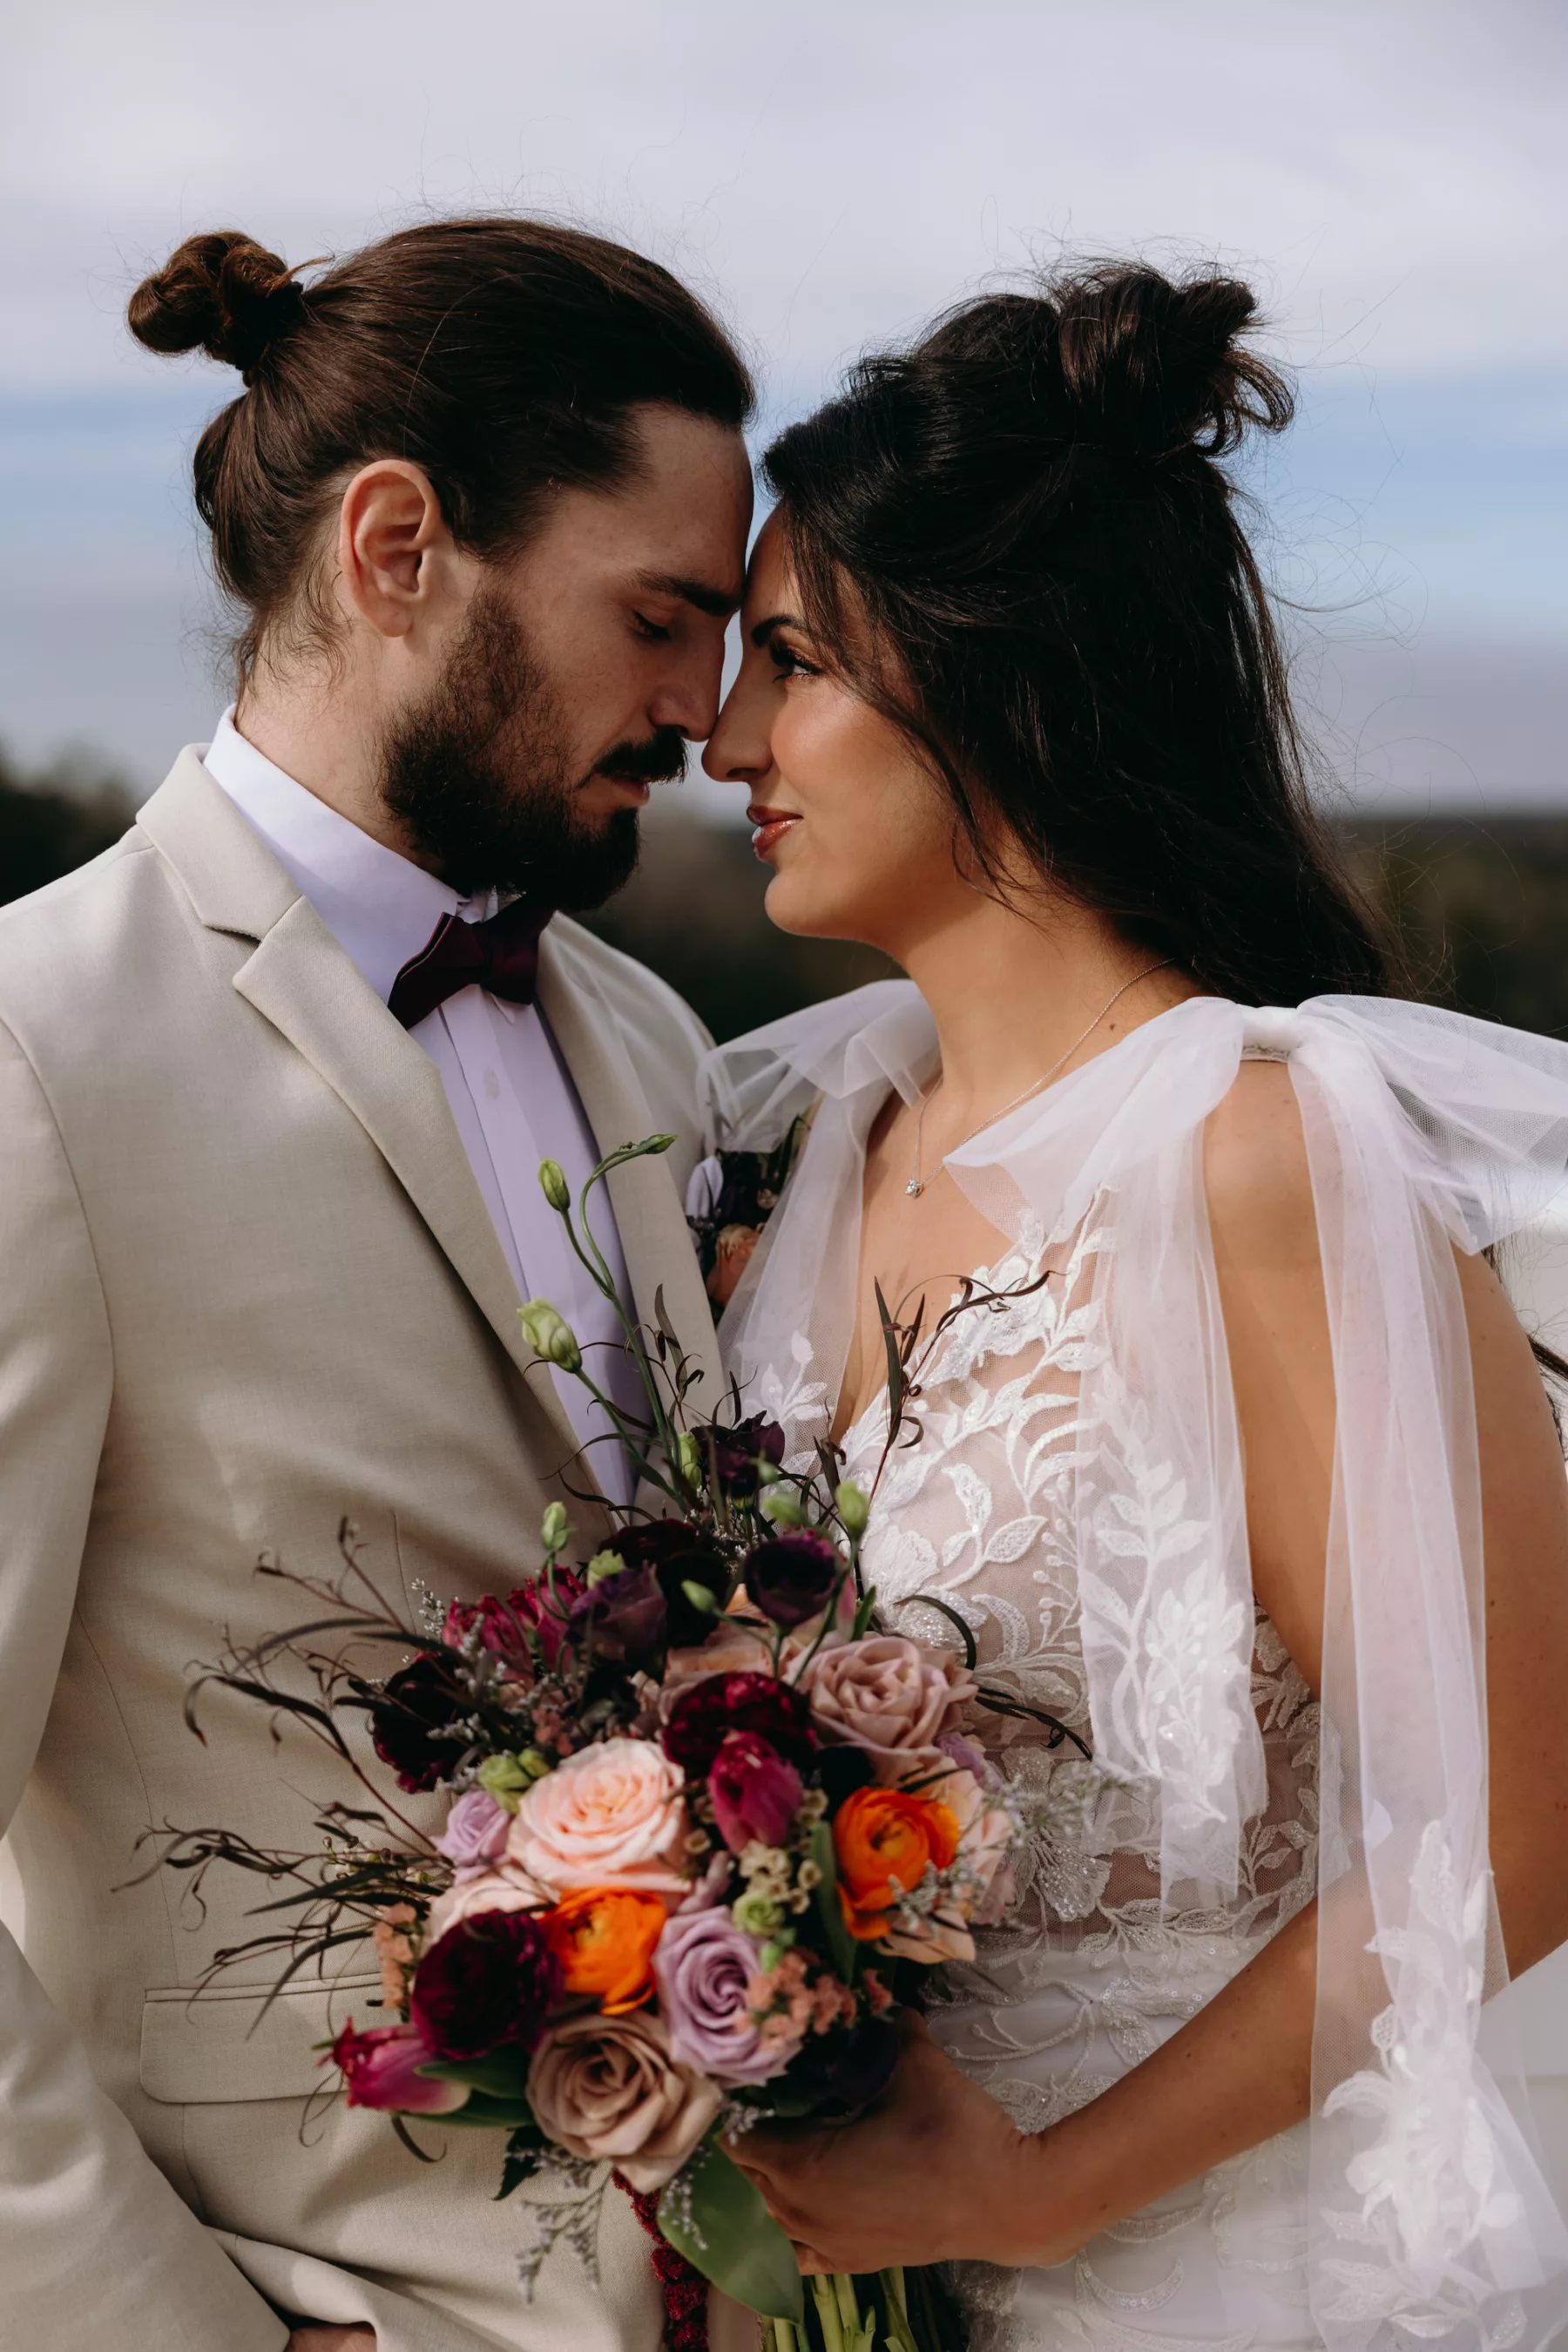 Bridal Half Up Half Down Wedding Hair Inspiration | Whimsical Purple and Orange Roses, Brown Amaranthus, Pink Tulips, Wax Flowers, and Greenery Bouquet | Tampa Bay Florist Save The Date Florida | Photographer Arianna J Photography | Planner MDP Events